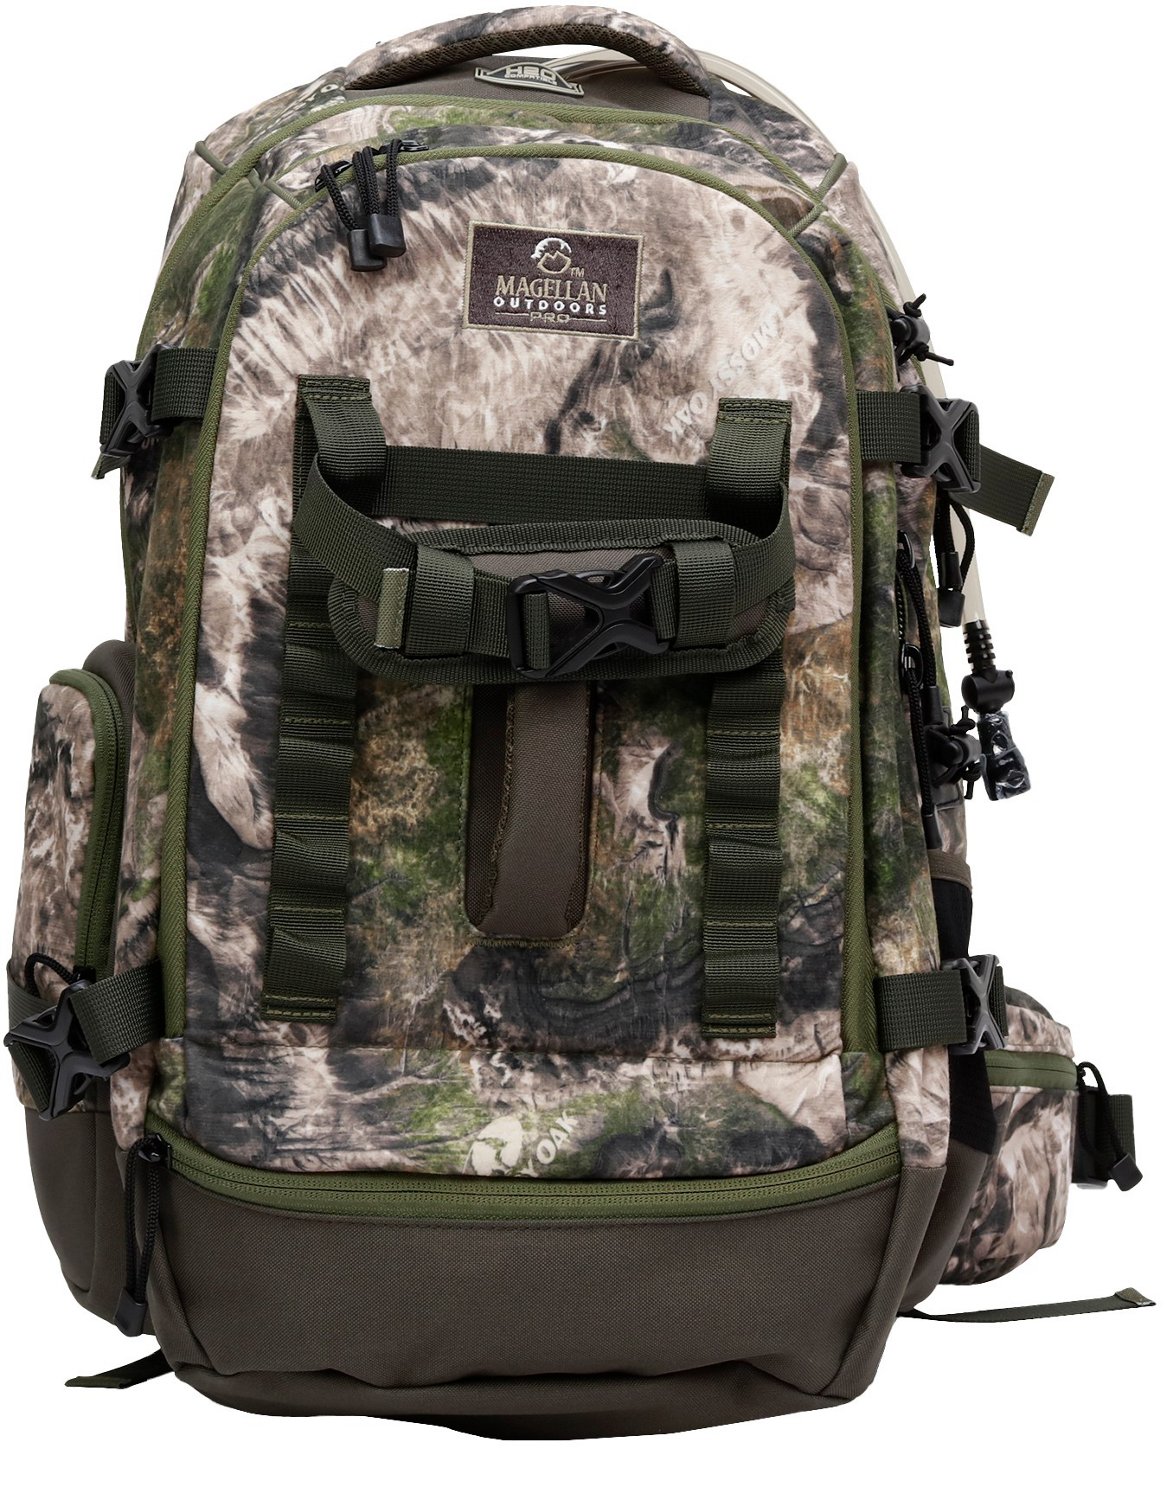 Magellan Outdoors Pro Hunt Day Pack